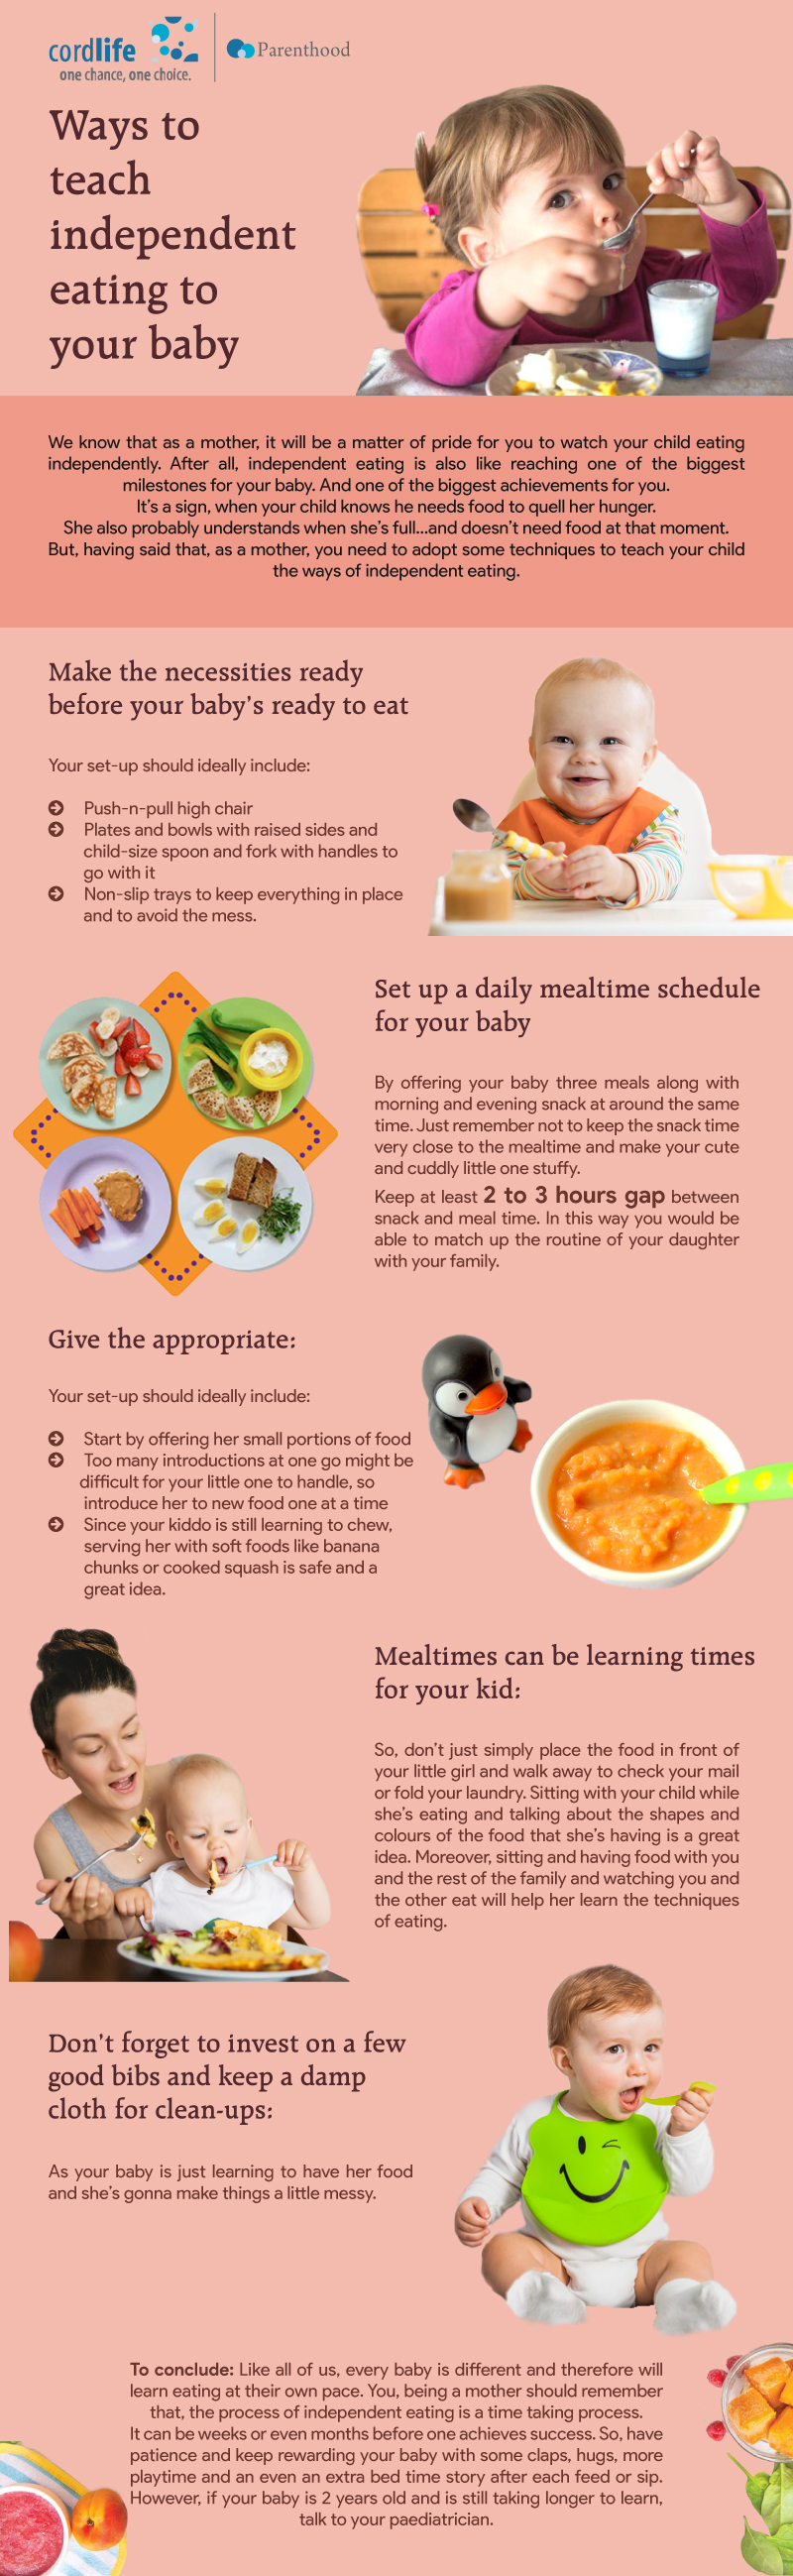 Ways to teach independent eating to your baby